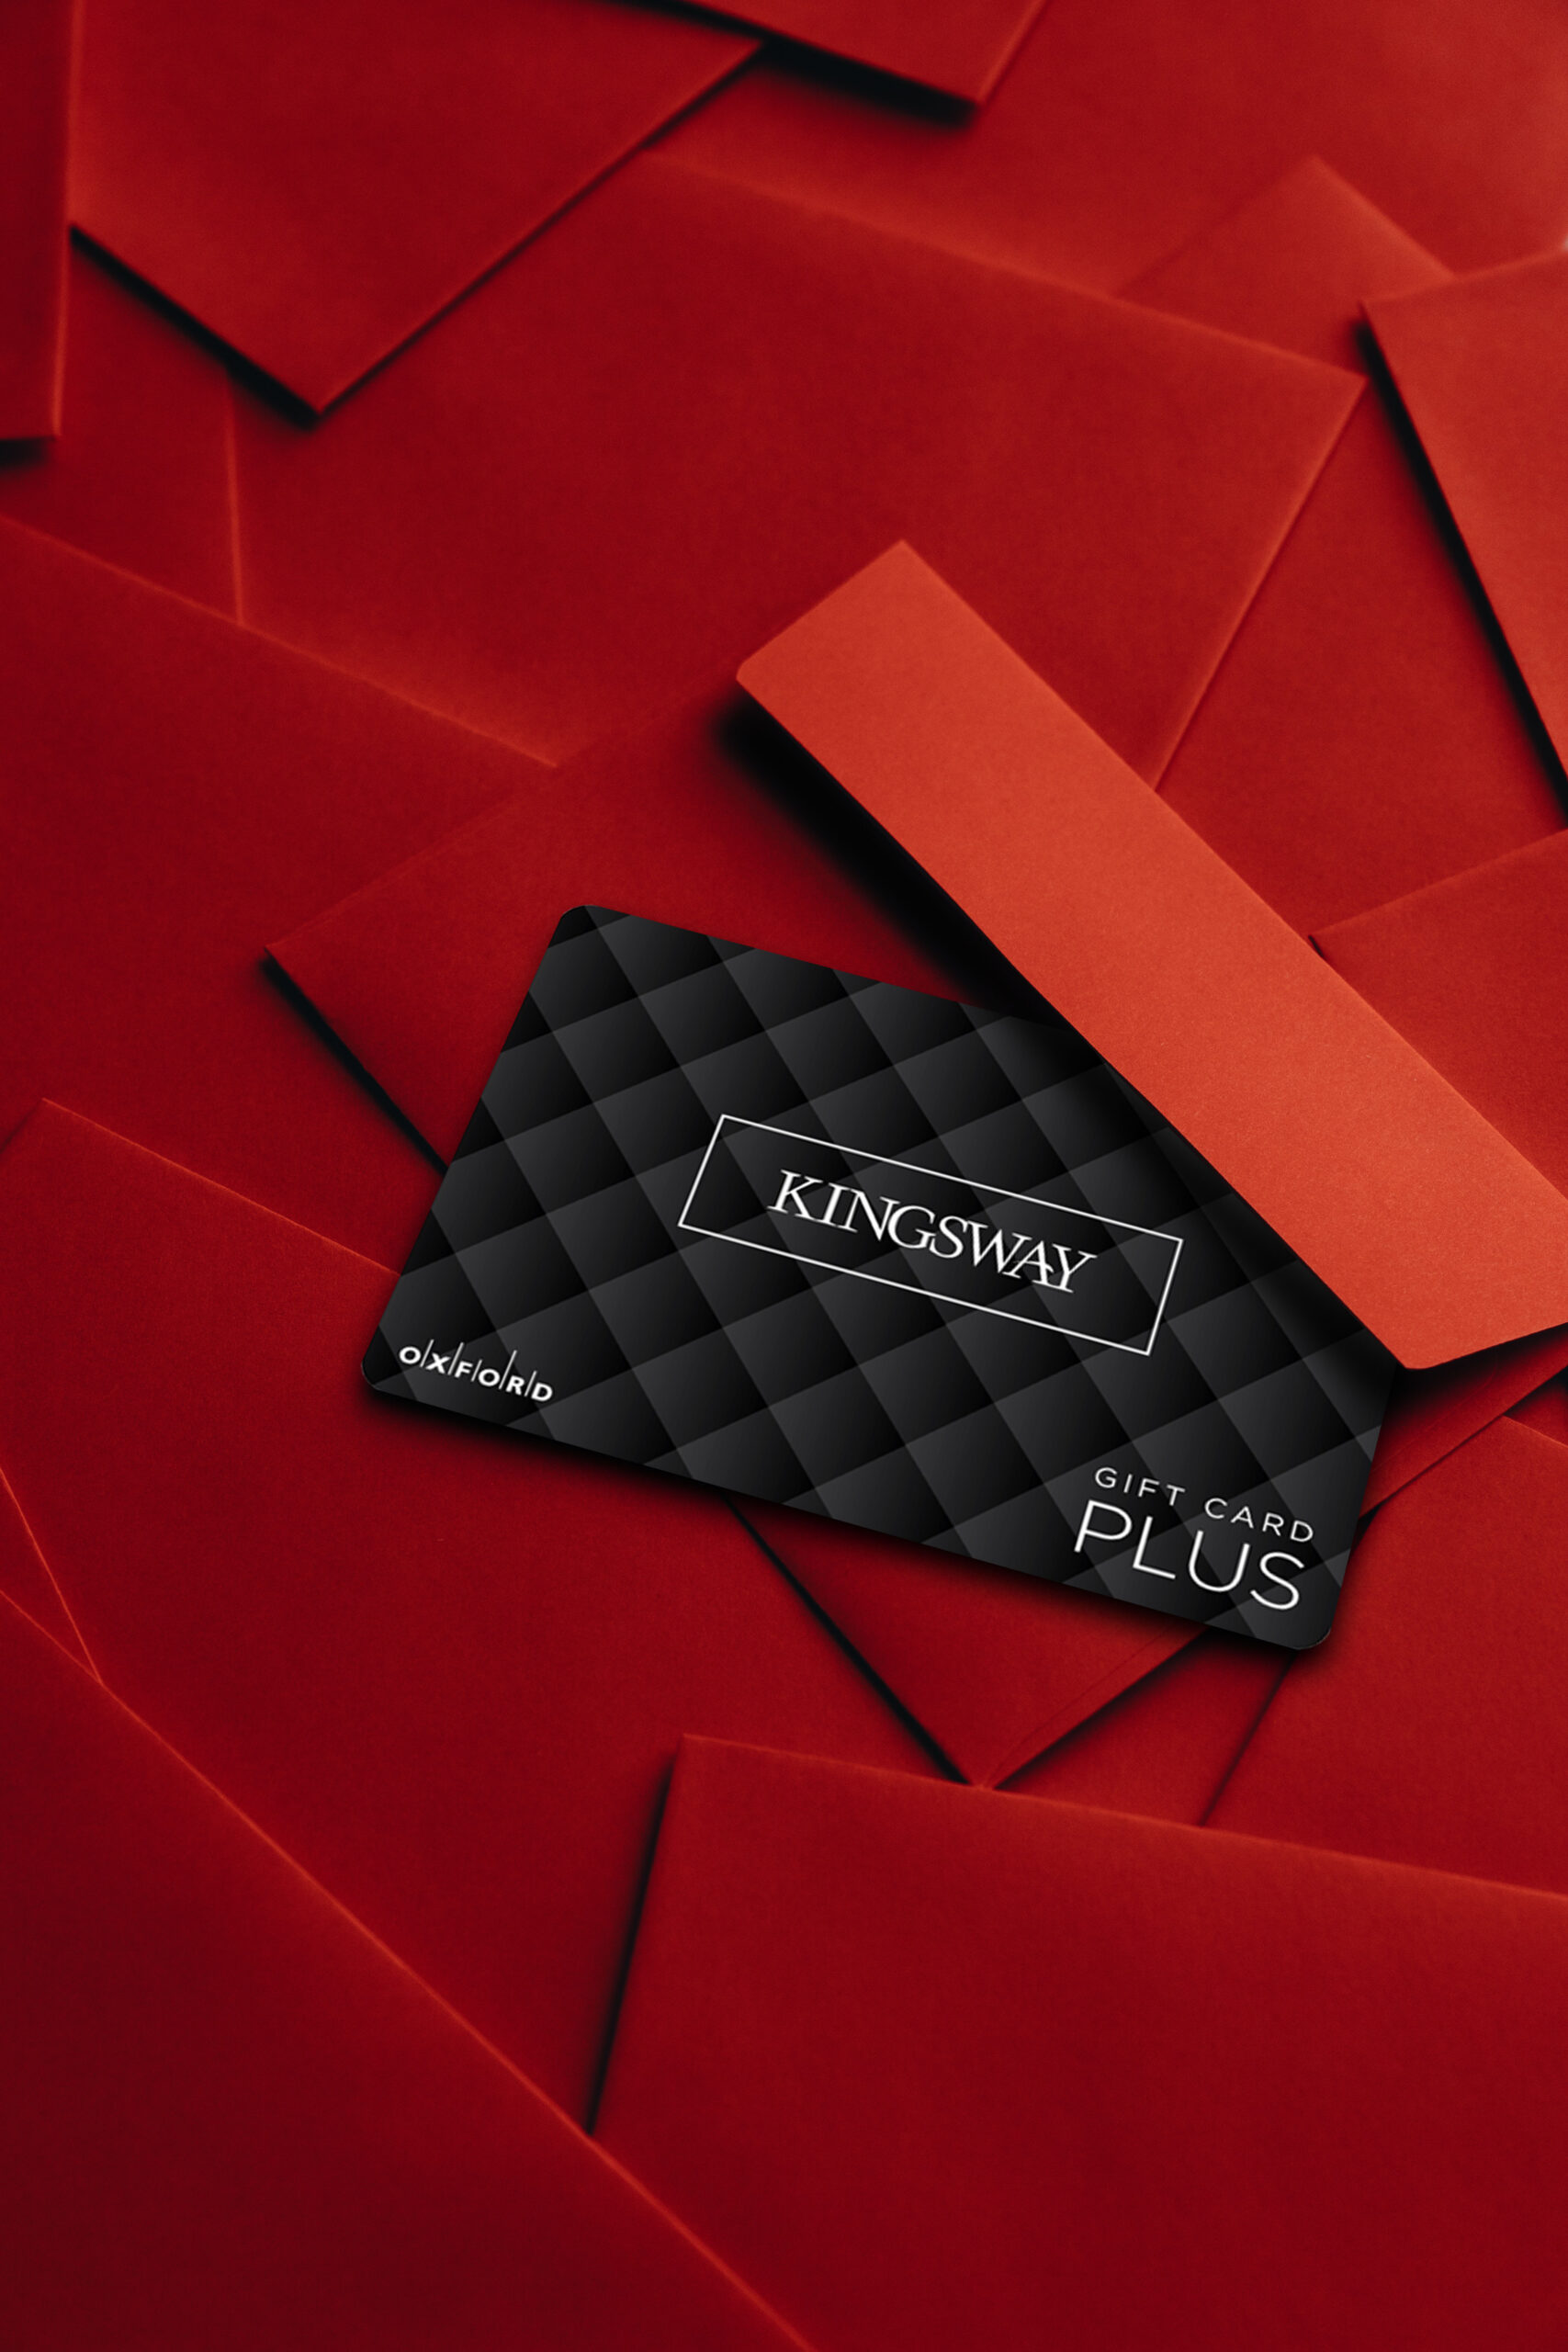 promo photo of Kingsway Mall gift card on top of red envelopes